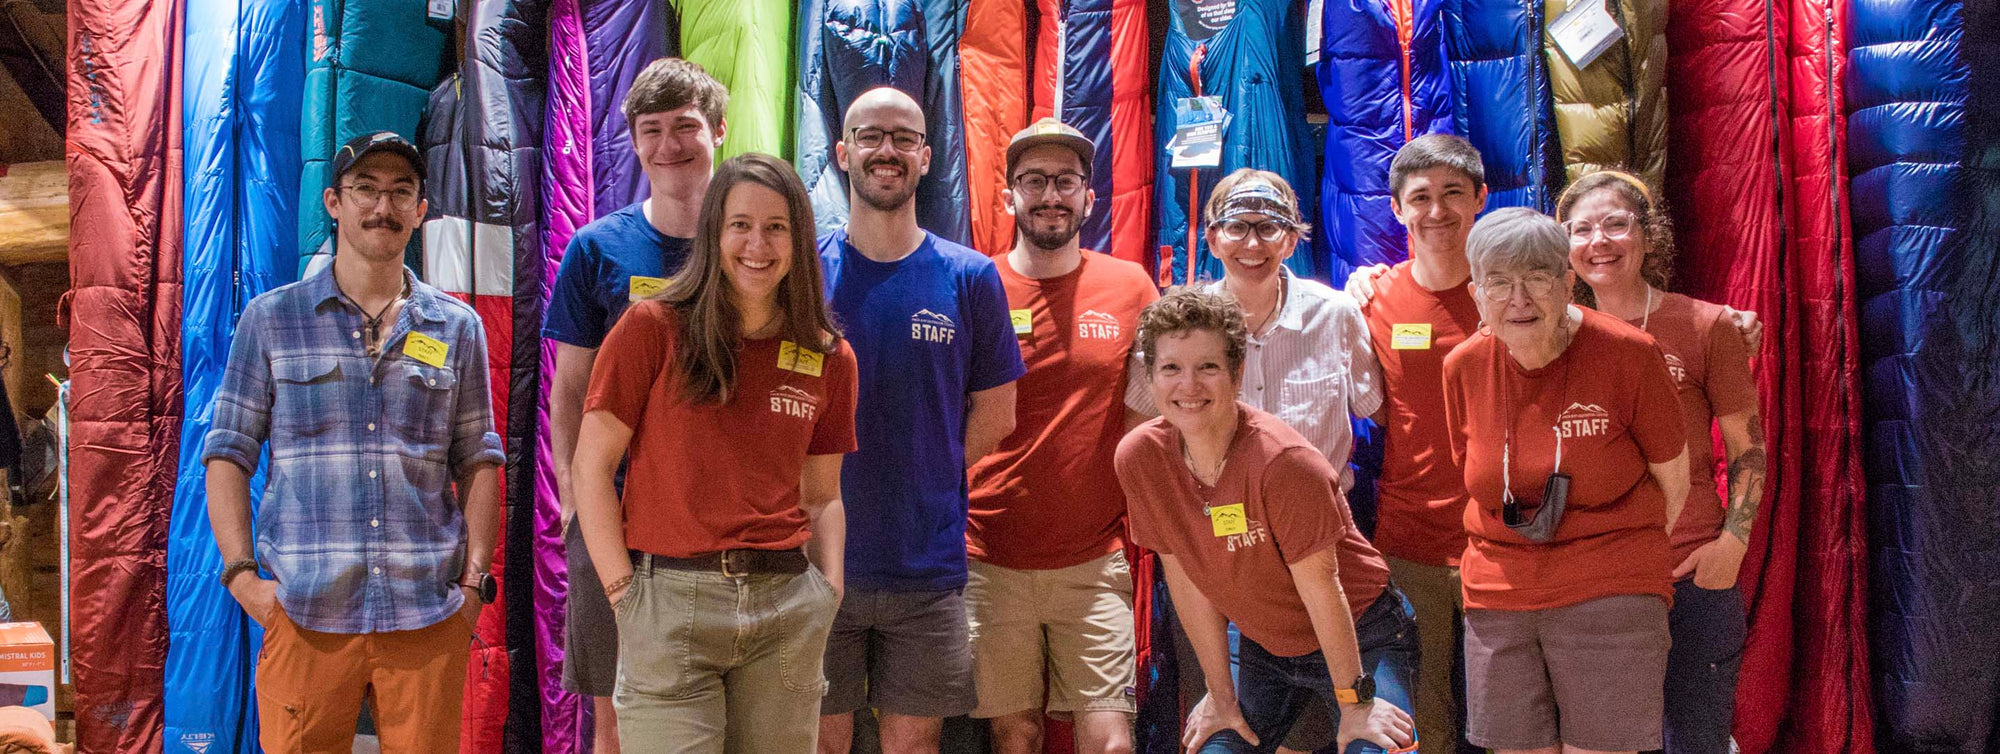 A group of staff members standing in front of sleeping bags.